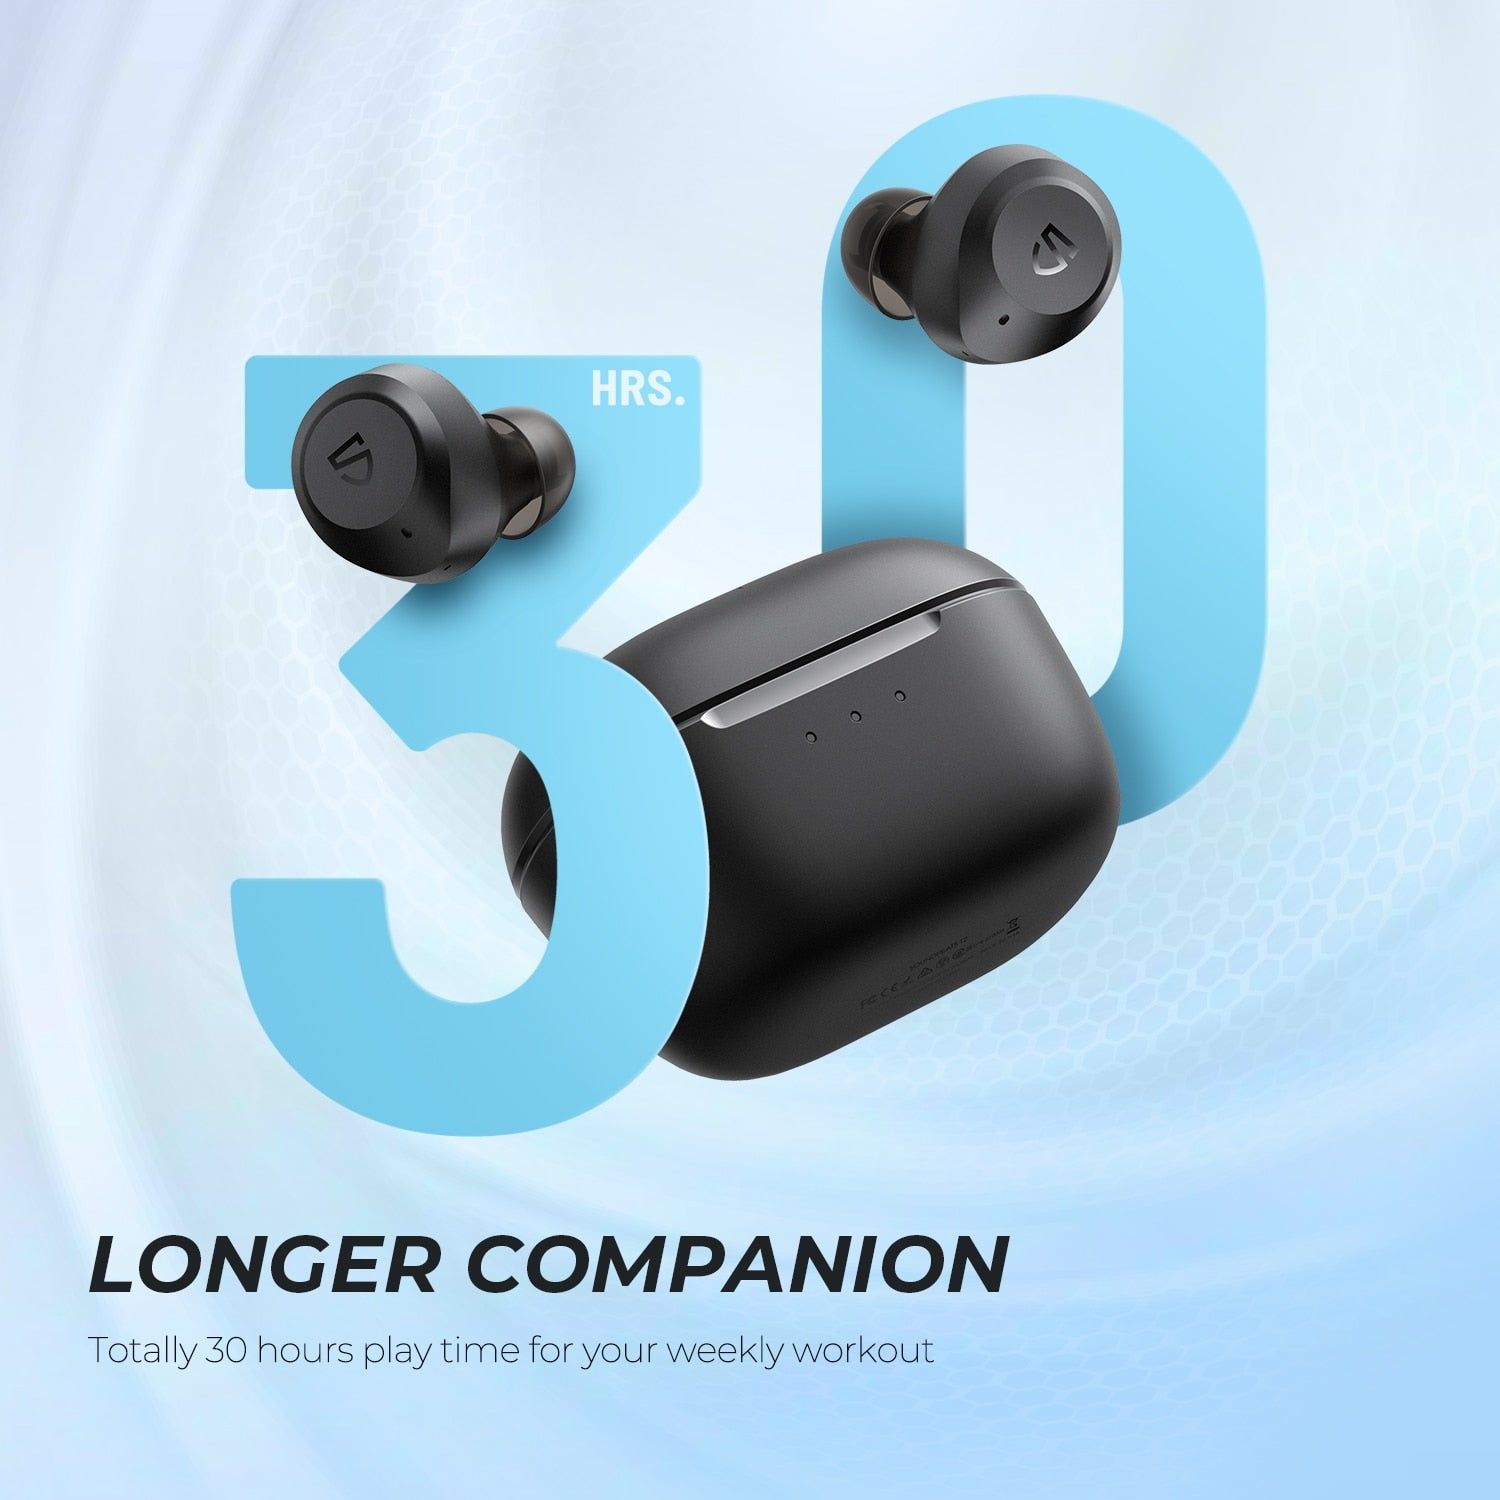 SoundPEATS T2 Earbuds With Hybrid Active Noise Cancelling | Hifi Media Store